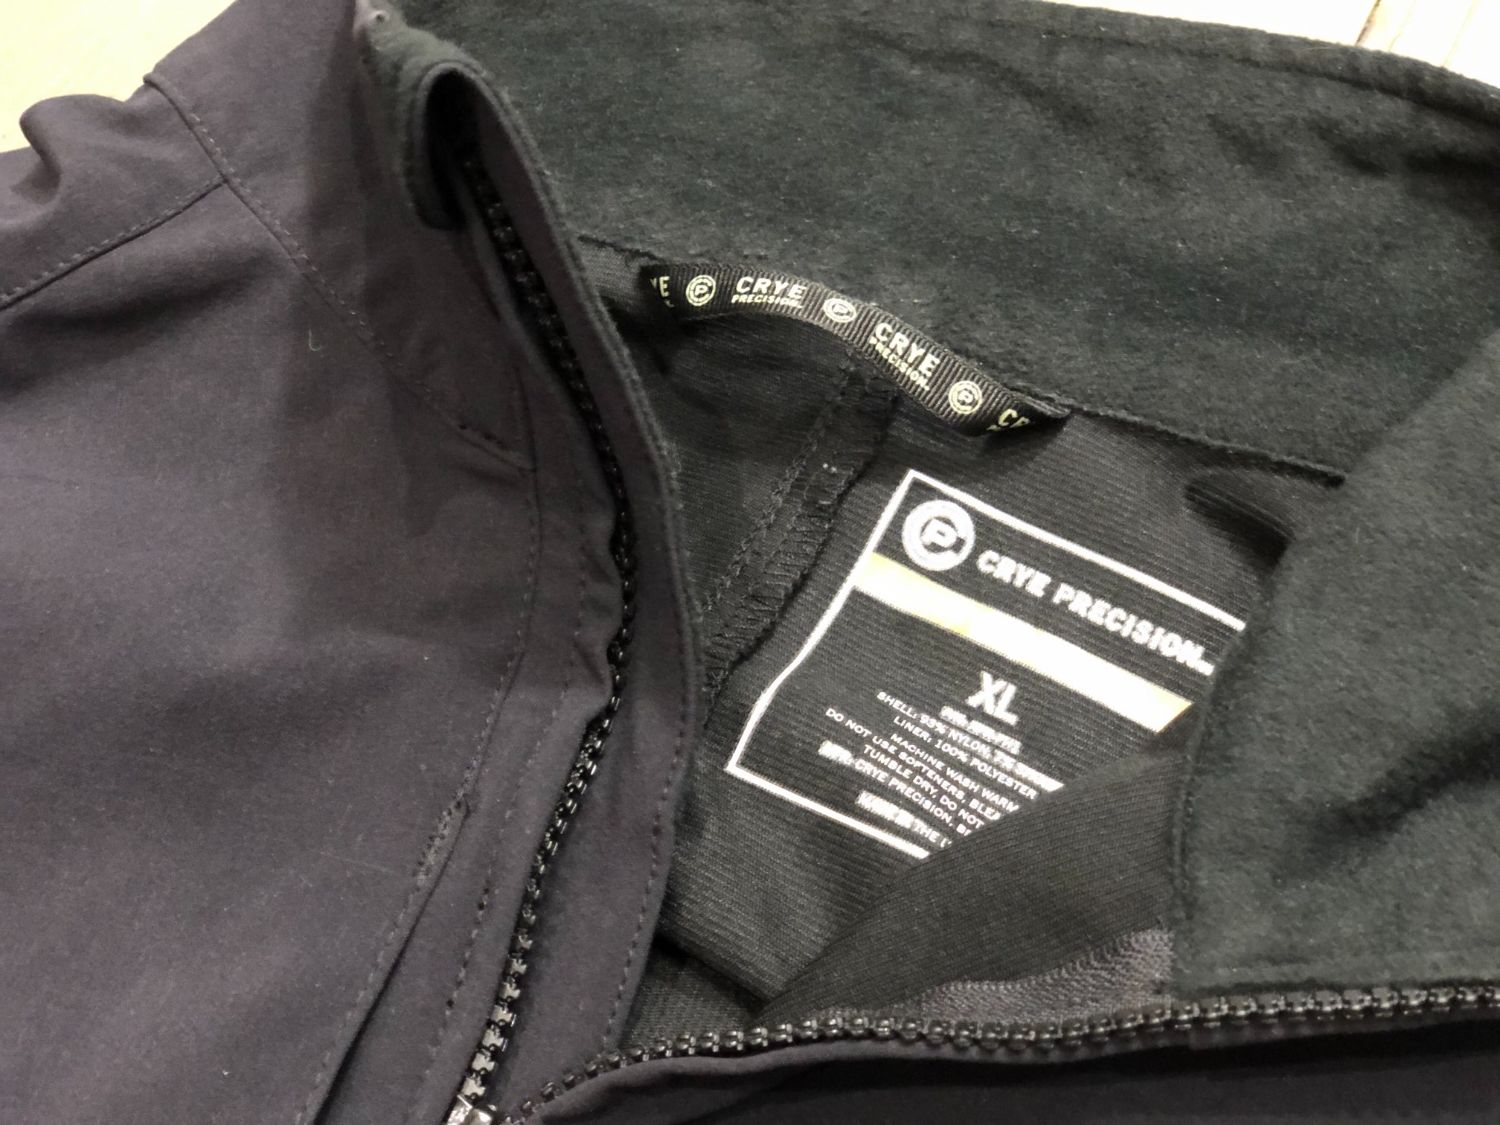 Crye Precision Fieldshell Jacket, Black XL - Gear - Airsoft Forums UK